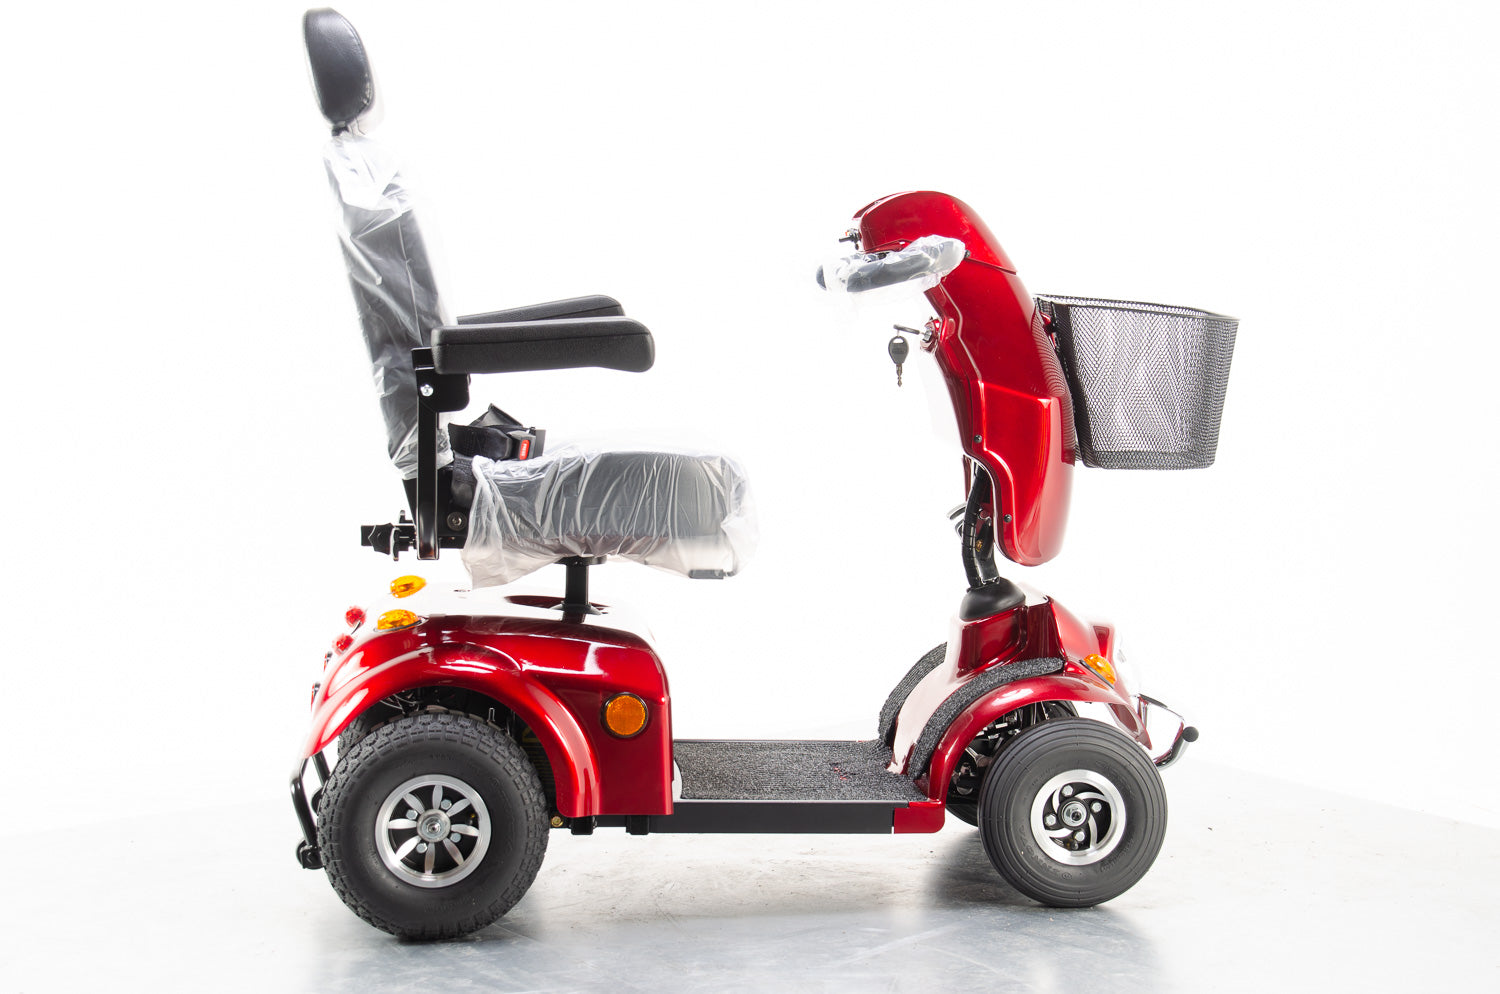 New Freerider City Ranger 8 8mph Mid Size Class 3 Mobility Scooter